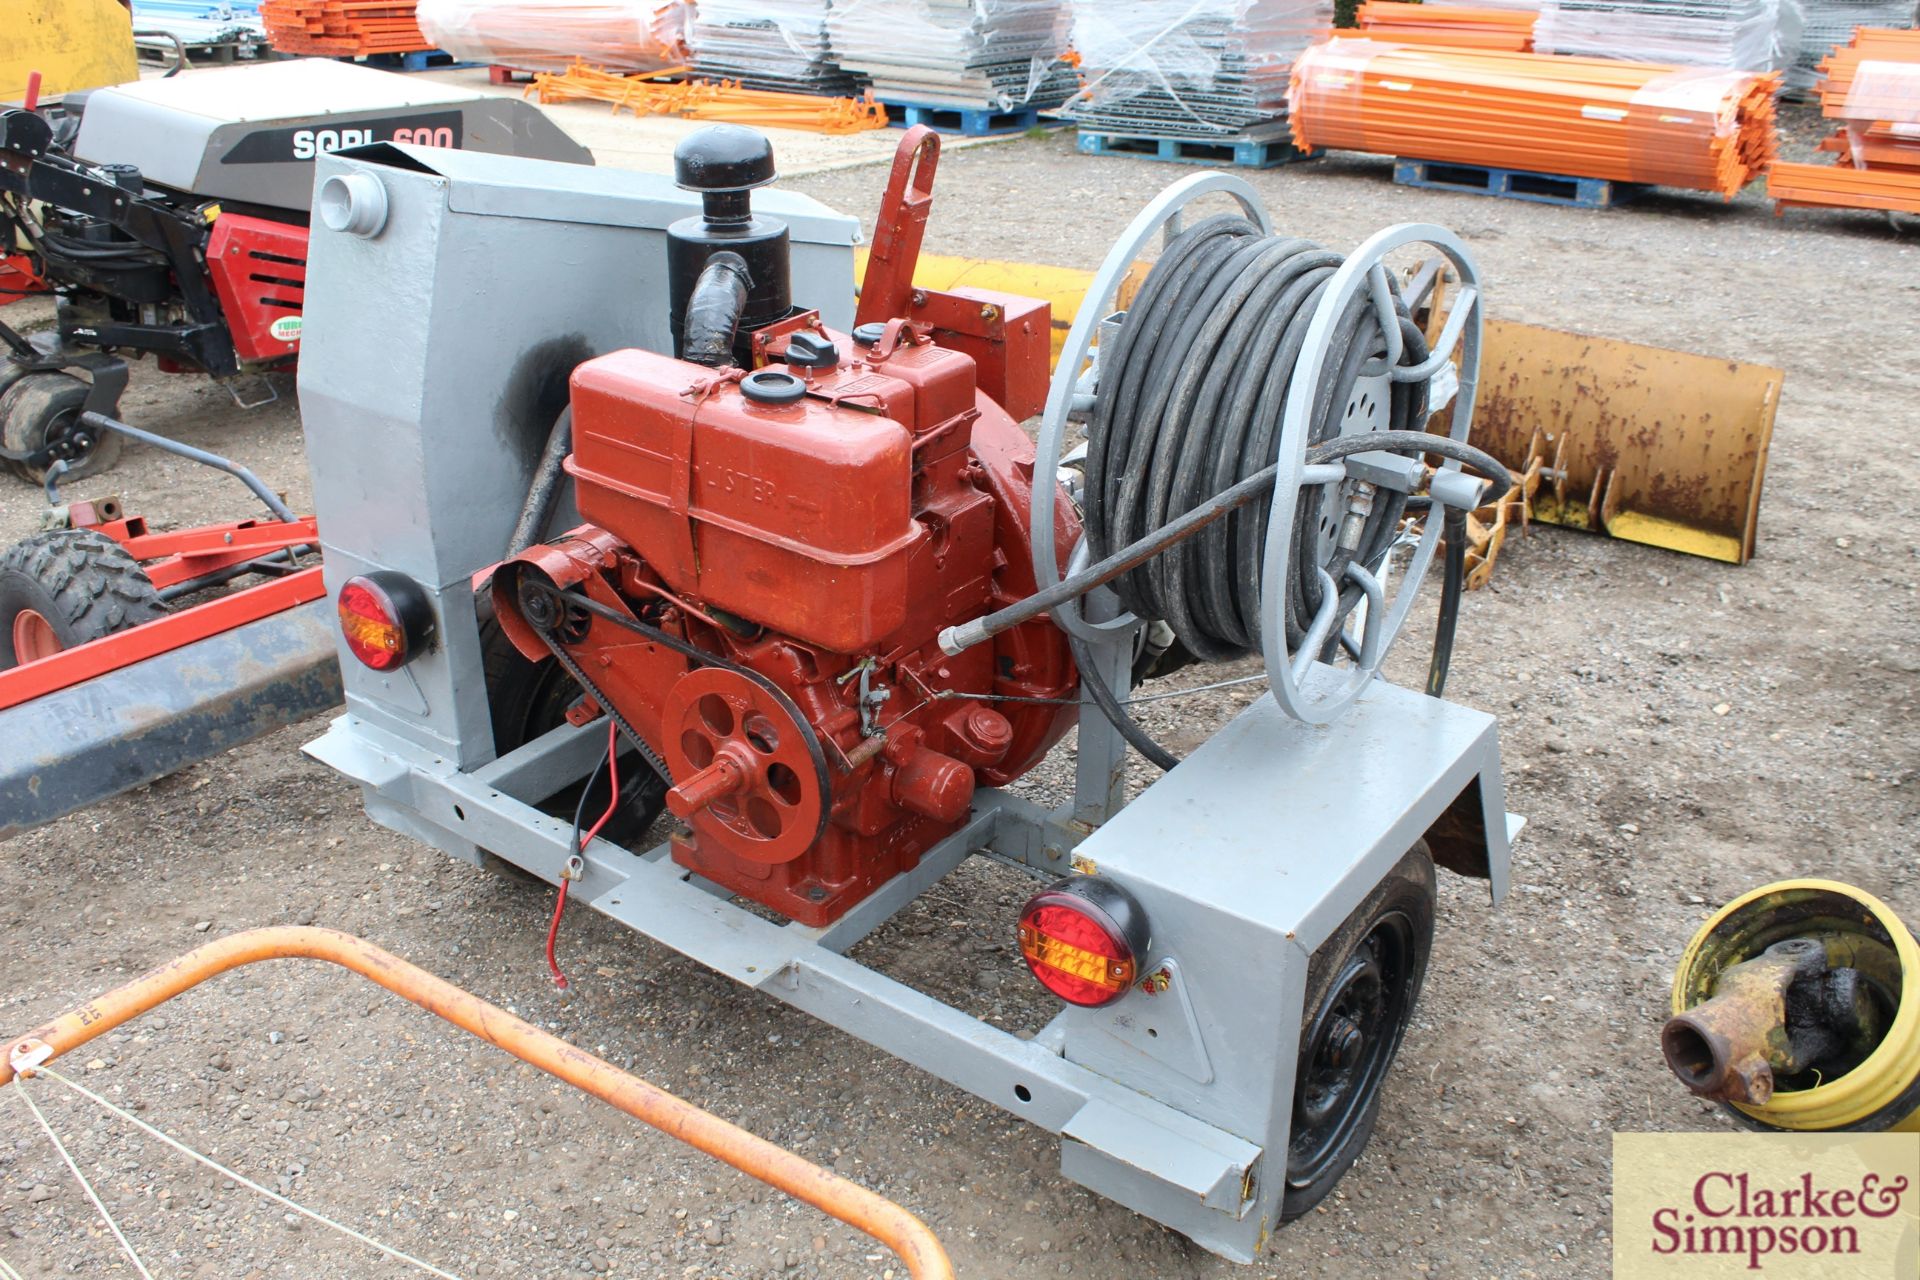 Harben fast tow high pressure drain jetter. With Lister diesel engine. - Image 4 of 8